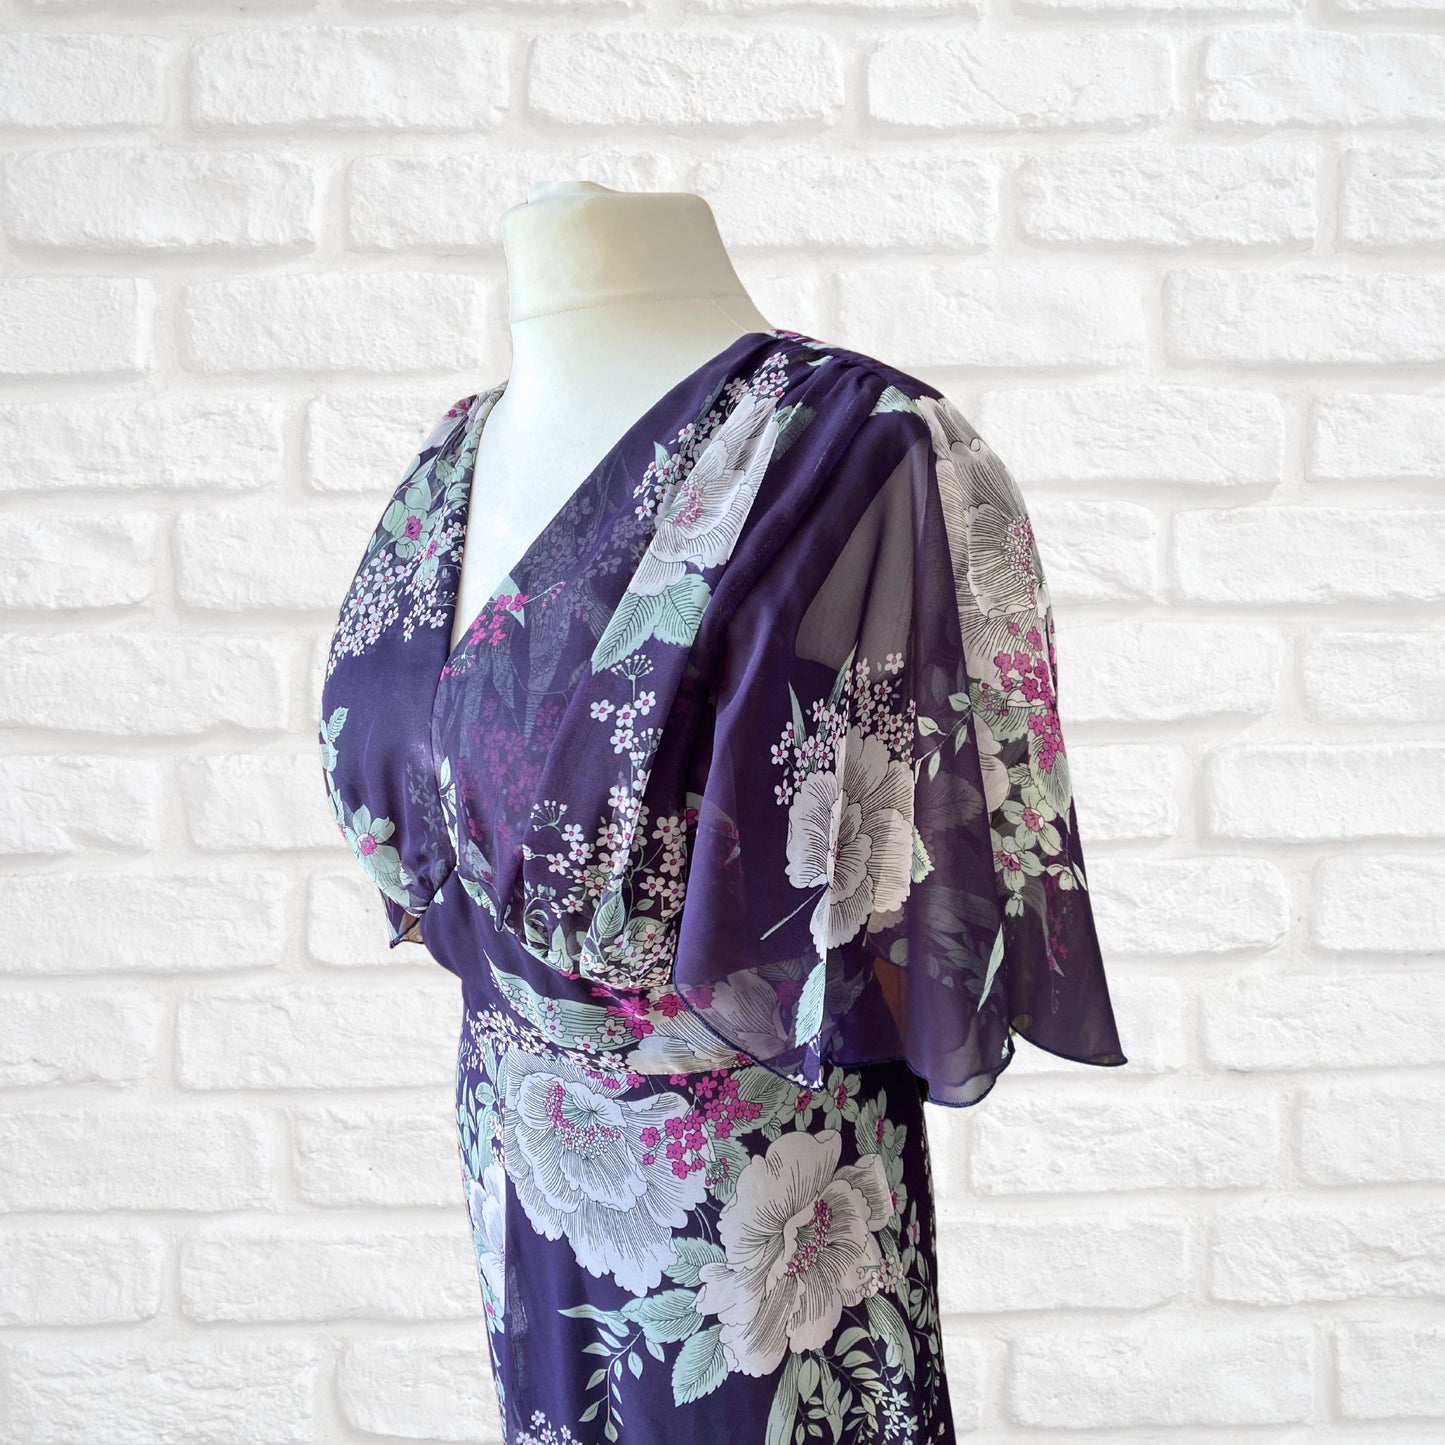 70s purple floral maxi dress with short angel sleeves. Approx UK size 14